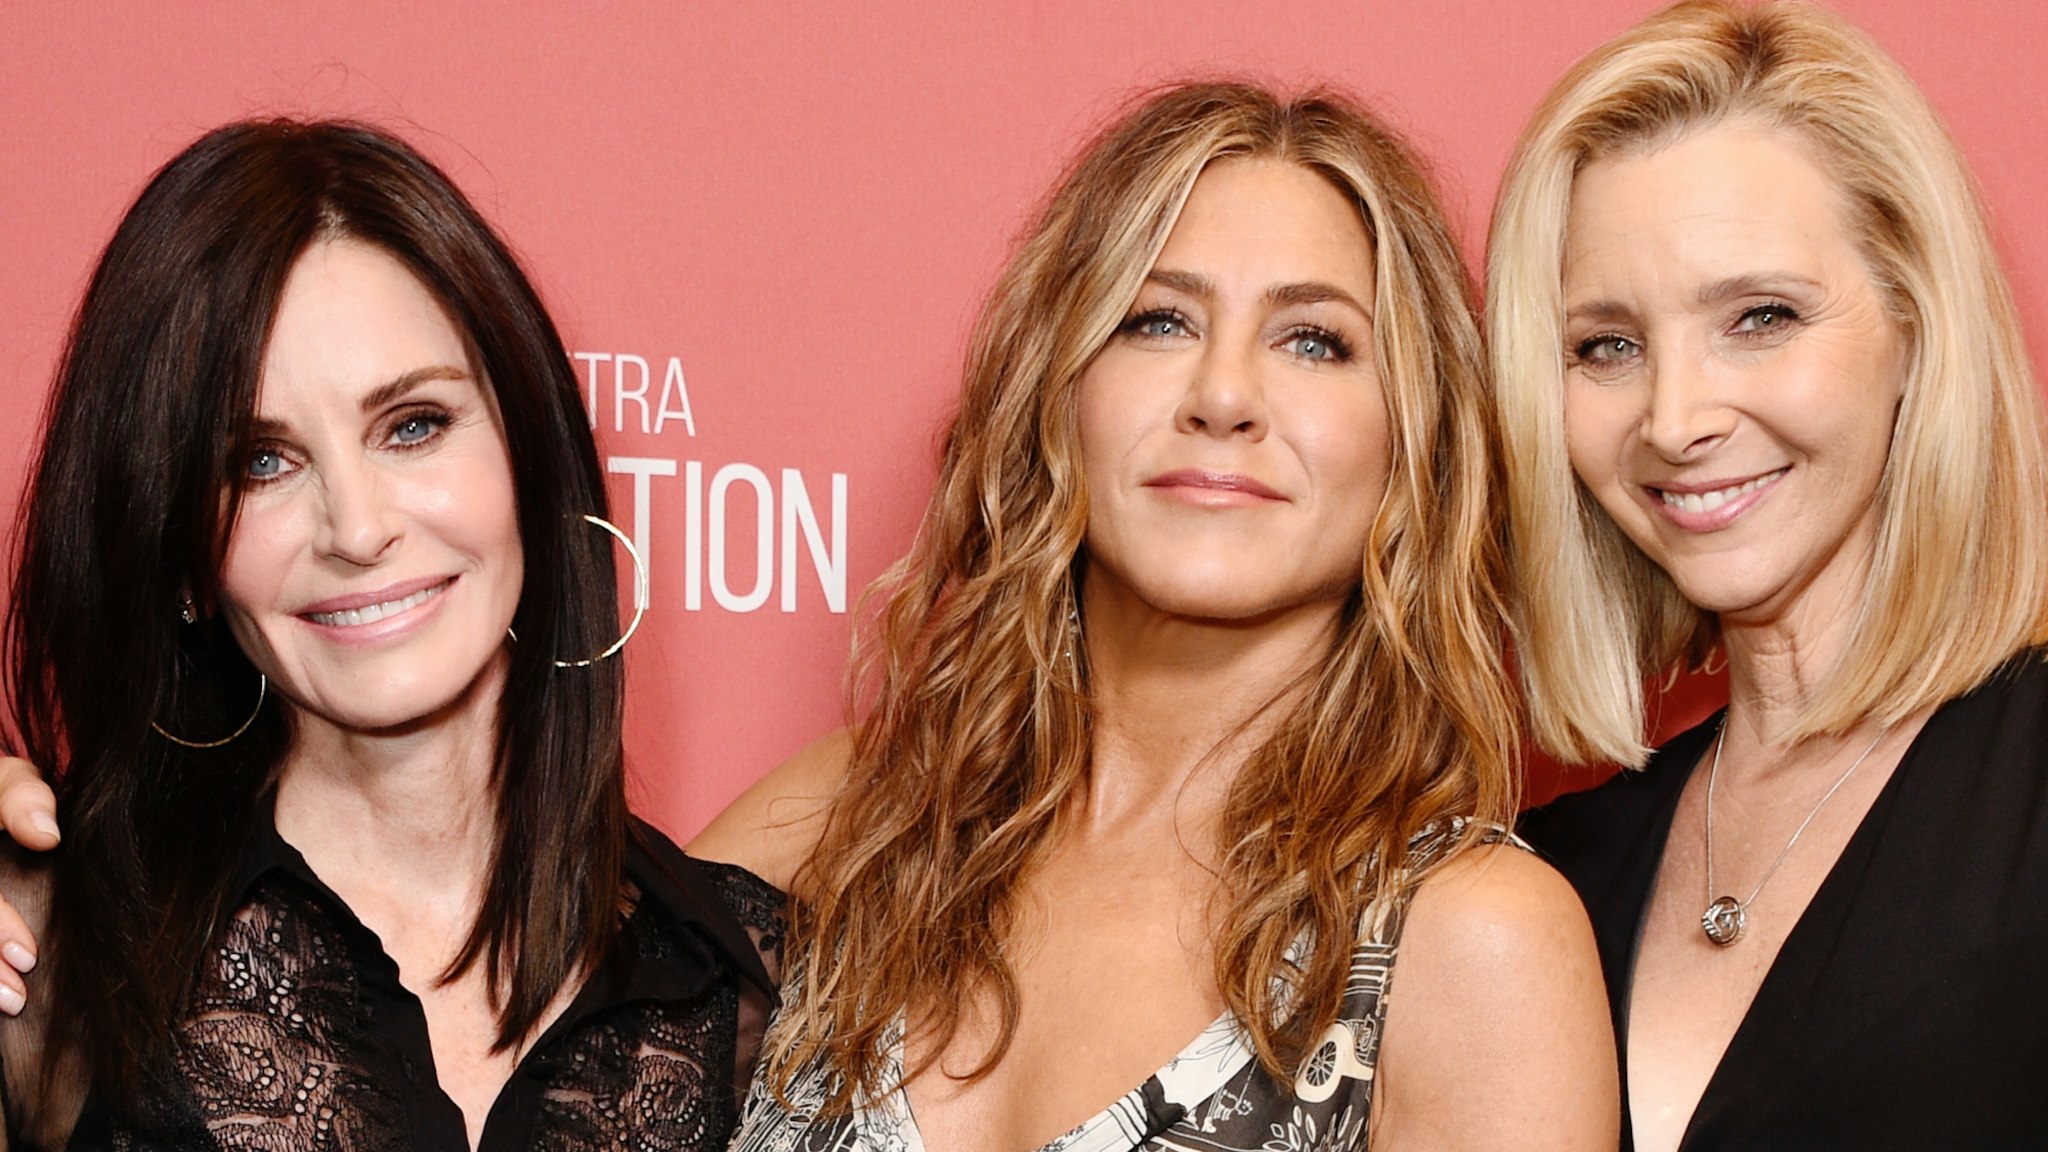 Courteney Cox, winner of the 'Artists Inspiration Award' Jennifer Aniston and Lisa Kudrow attend SAG-AFTRA Foundation's 4th Annual Patron of the Artists Awards at Wallis Annenberg Center for the Performing Arts on November 07, 2019 in Beverly Hills, California.